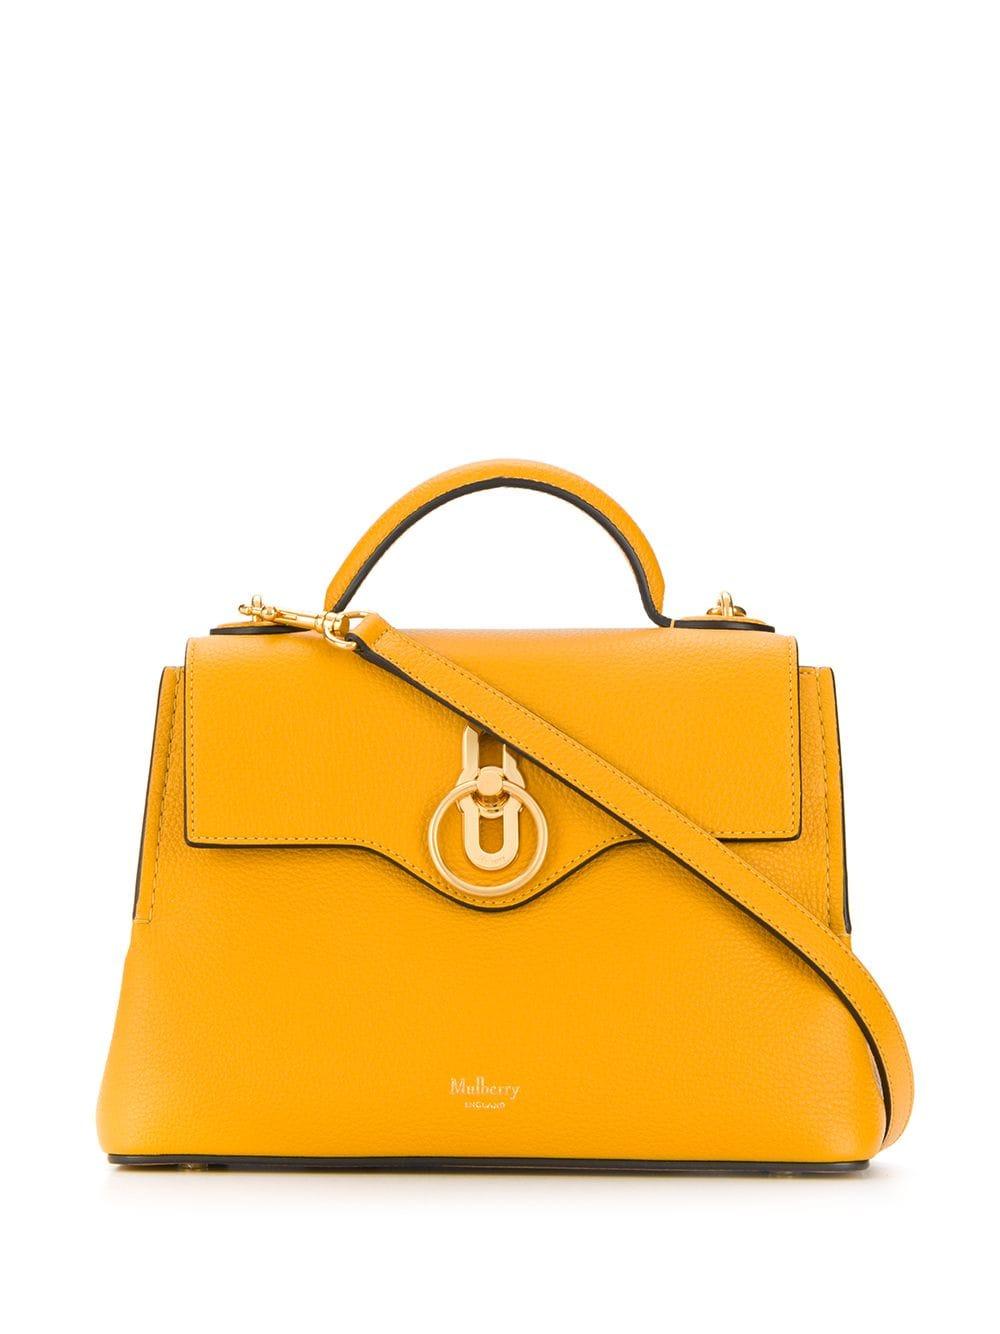 Mulberry Leather Mini Seaton Classic Grain Shoulder Bag in Yellow - Lyst